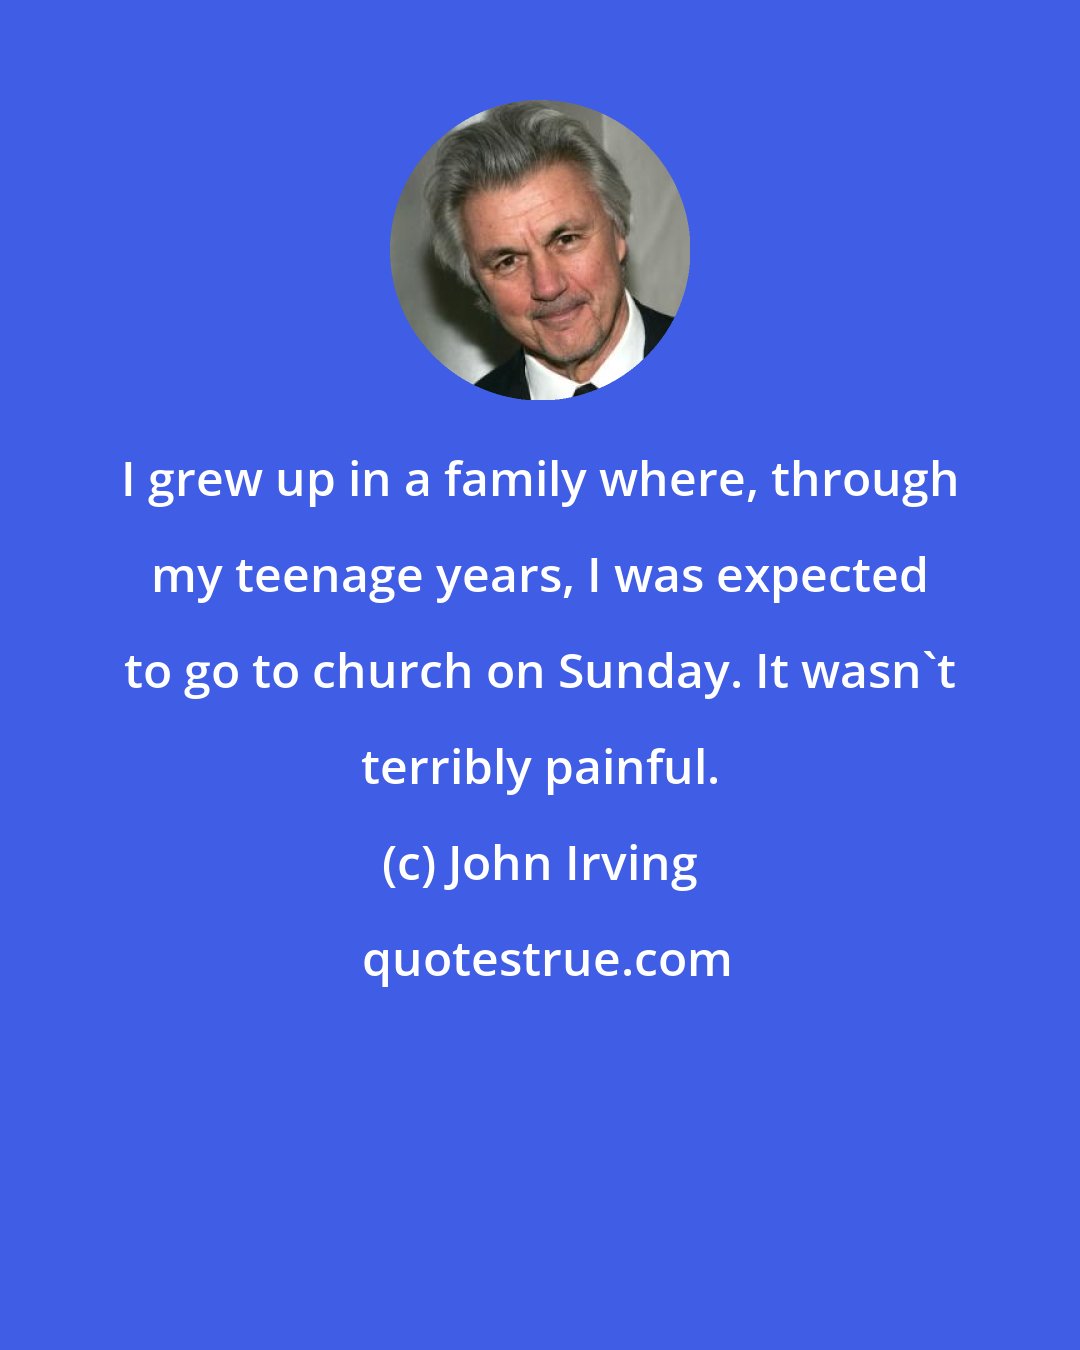 John Irving: I grew up in a family where, through my teenage years, I was expected to go to church on Sunday. It wasn't terribly painful.